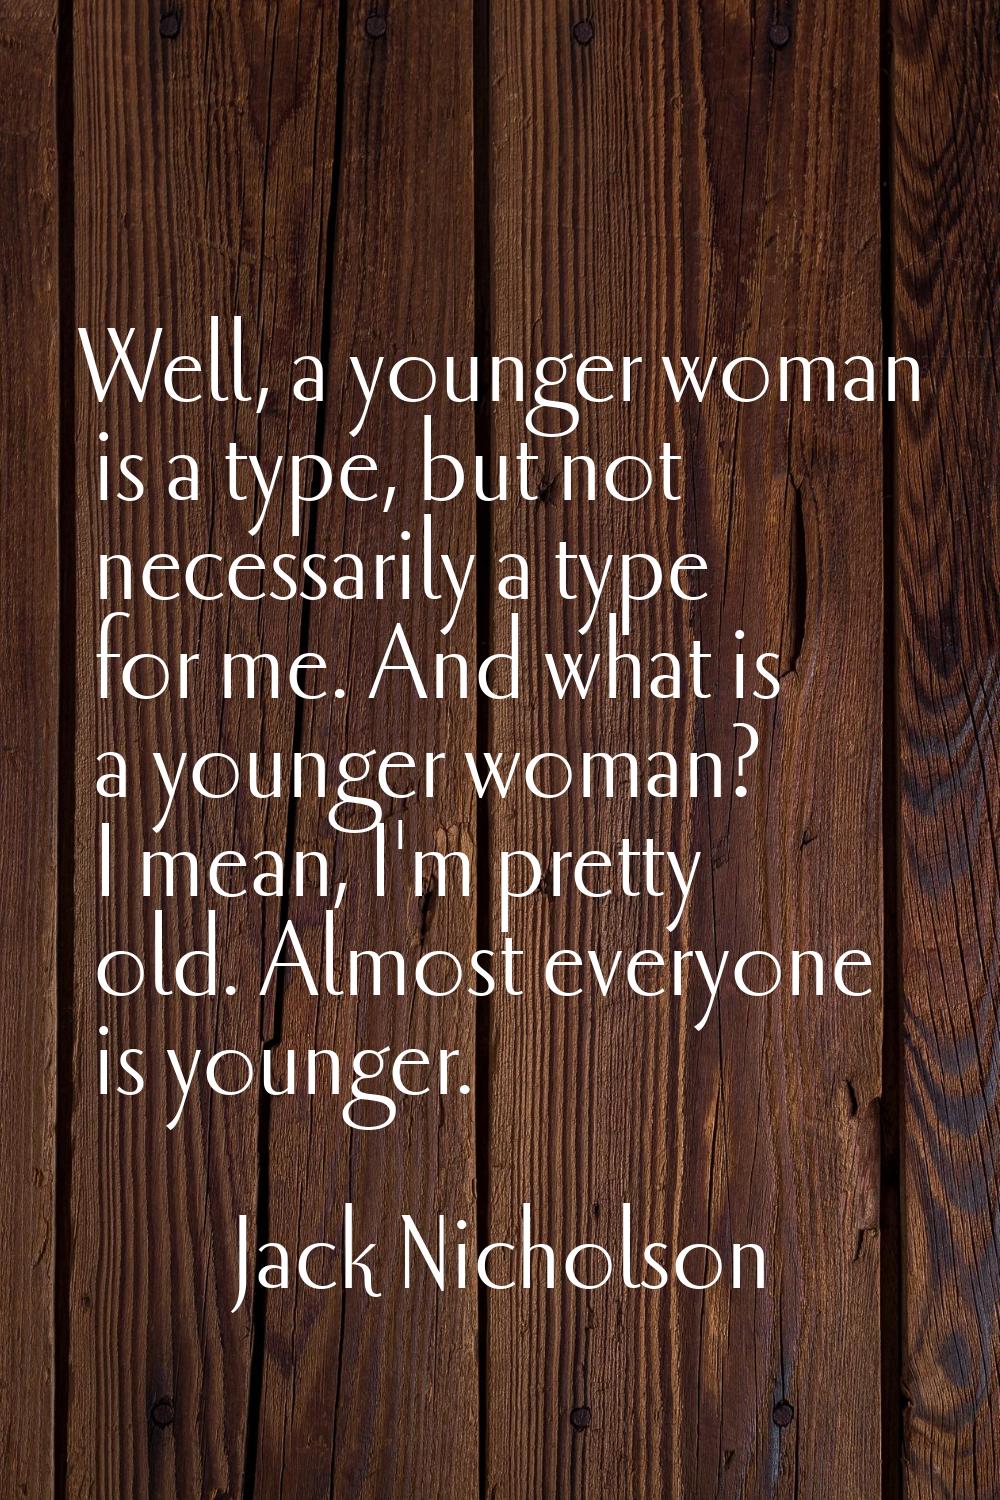 Well, a younger woman is a type, but not necessarily a type for me. And what is a younger woman? I 